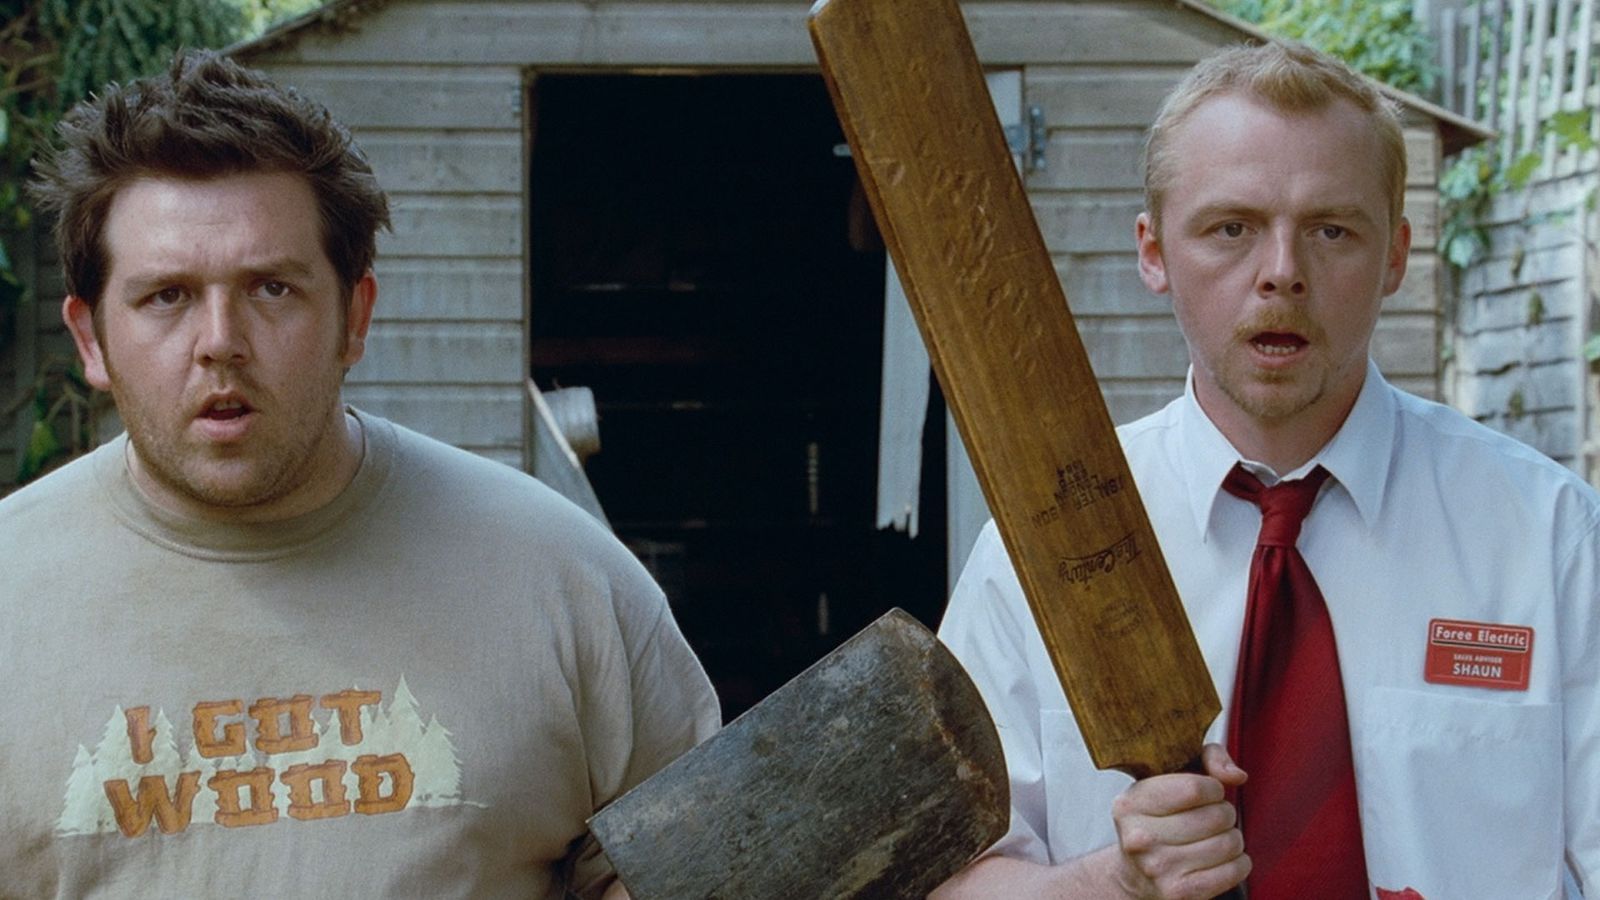 Shaun and Ed from Shaun of the Dead